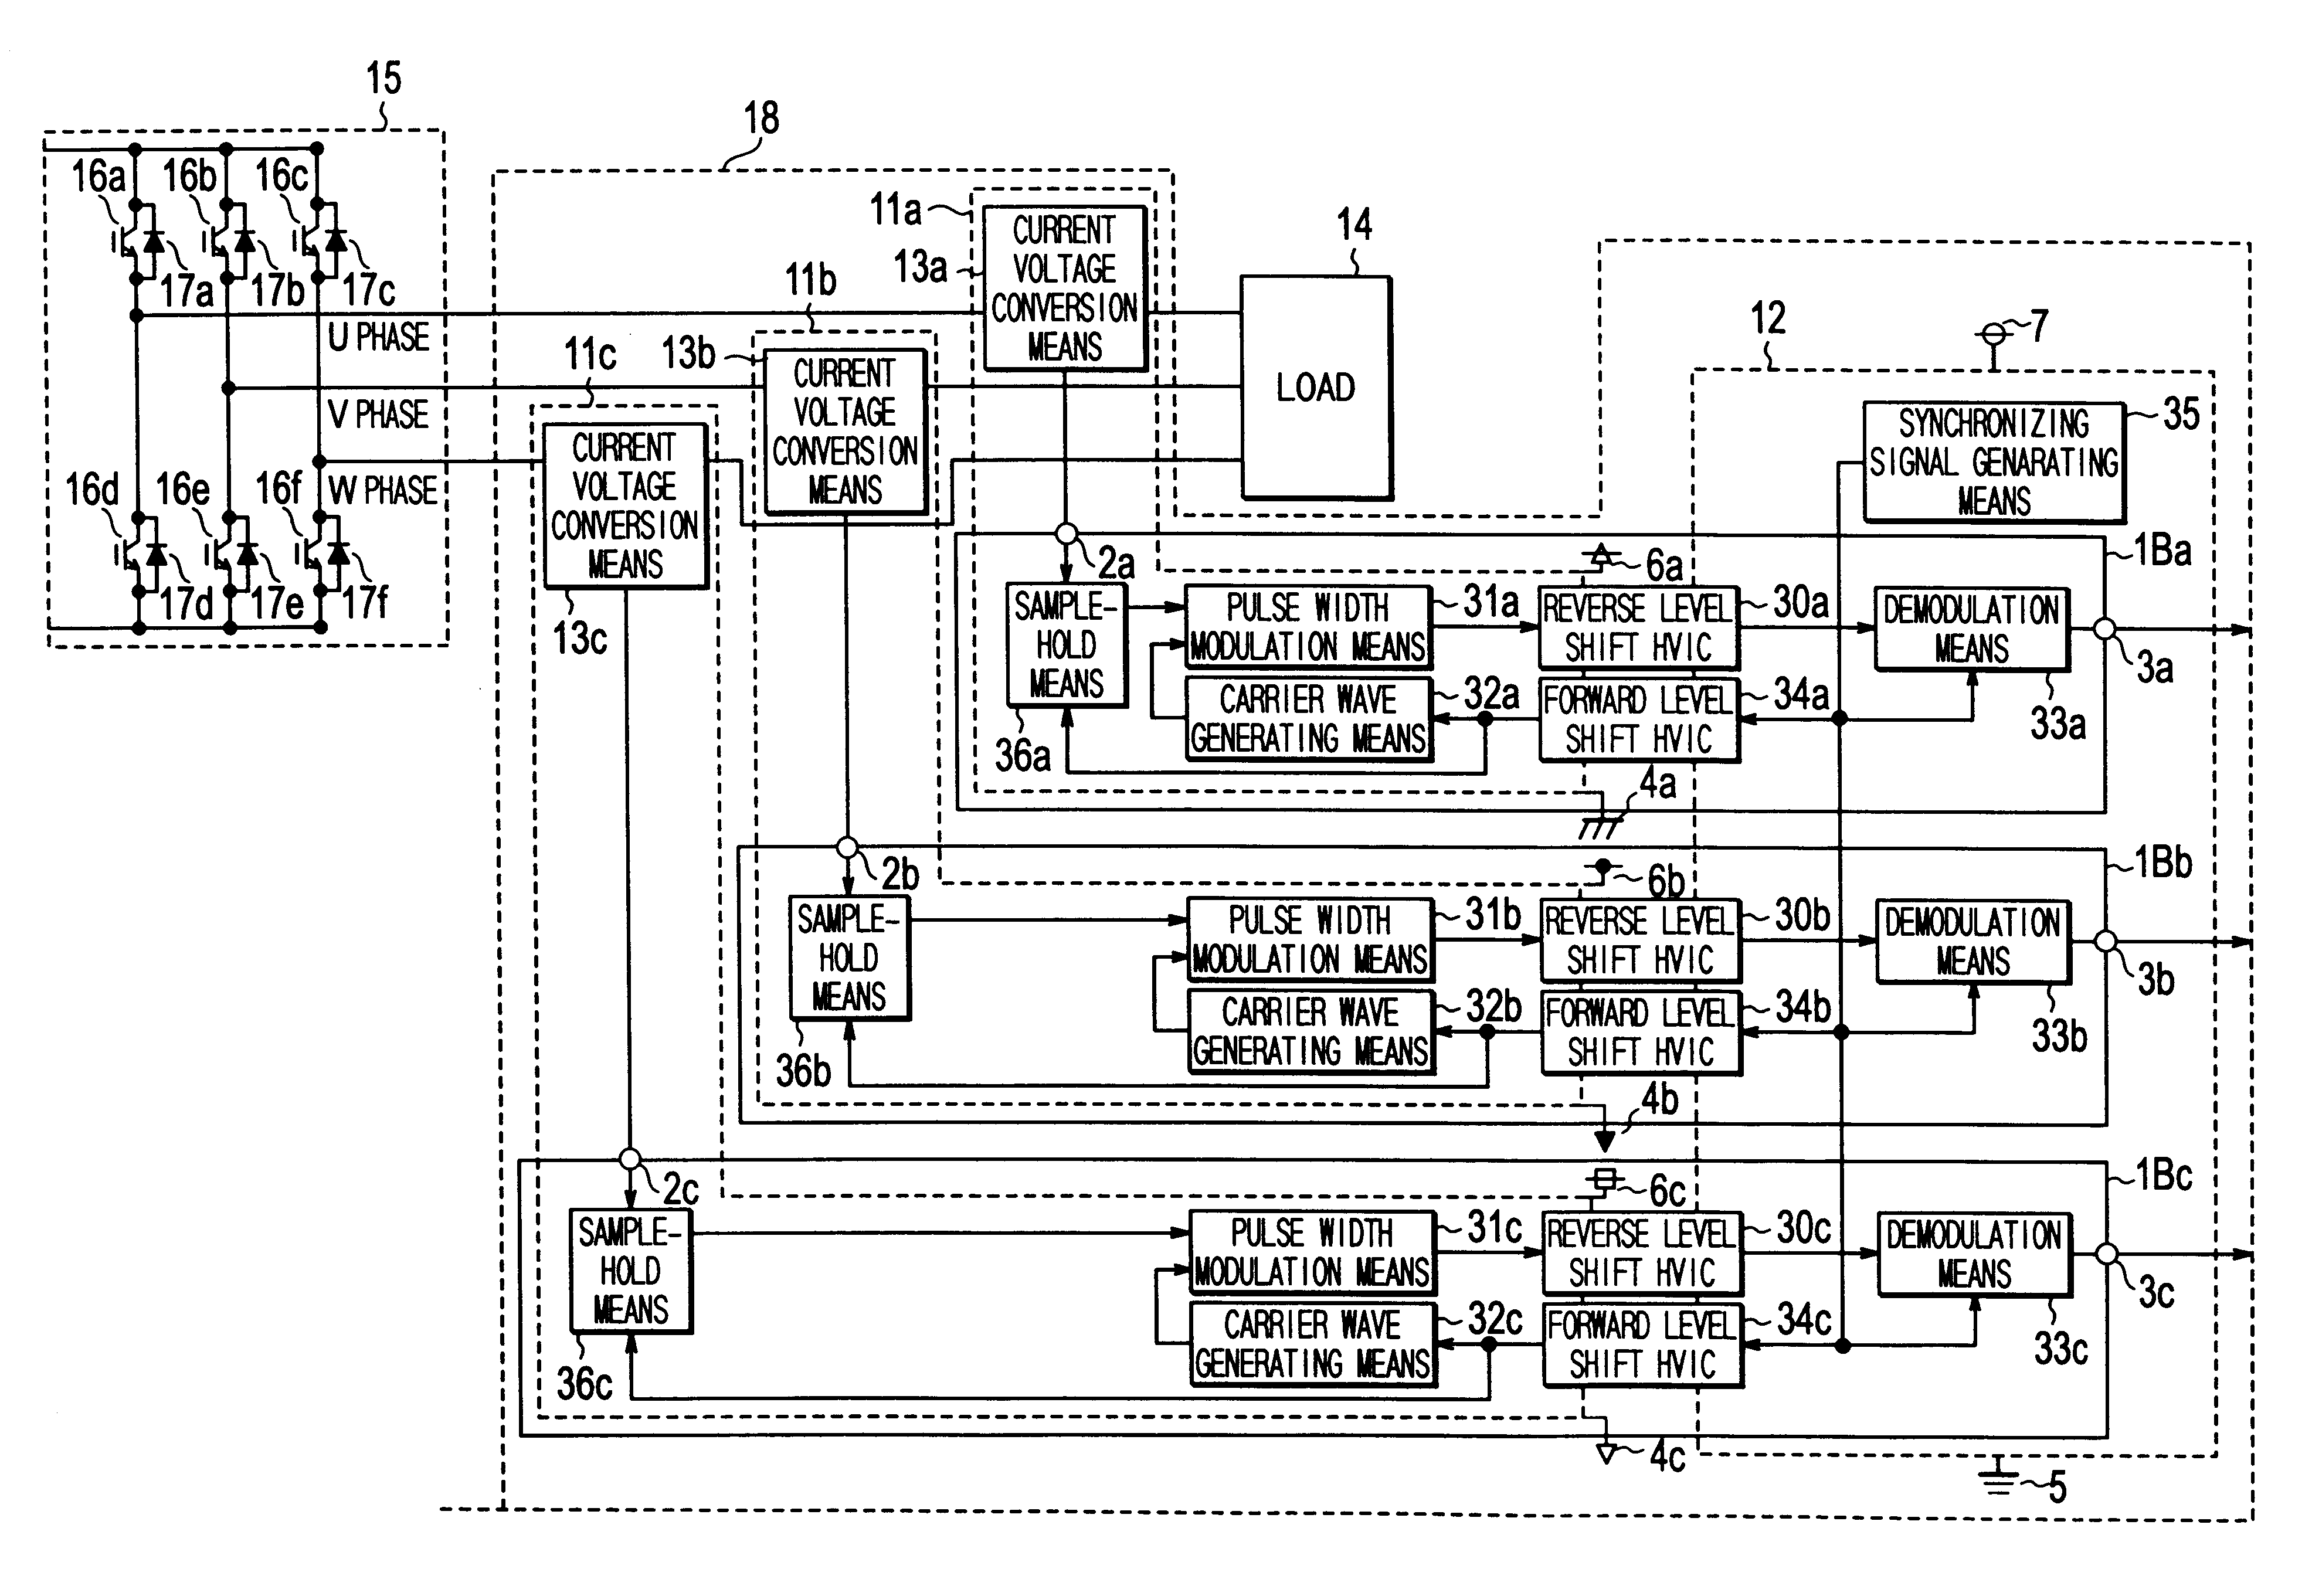 Analog signal detecting circuit, and AC side current detector of semiconductor power conversion device